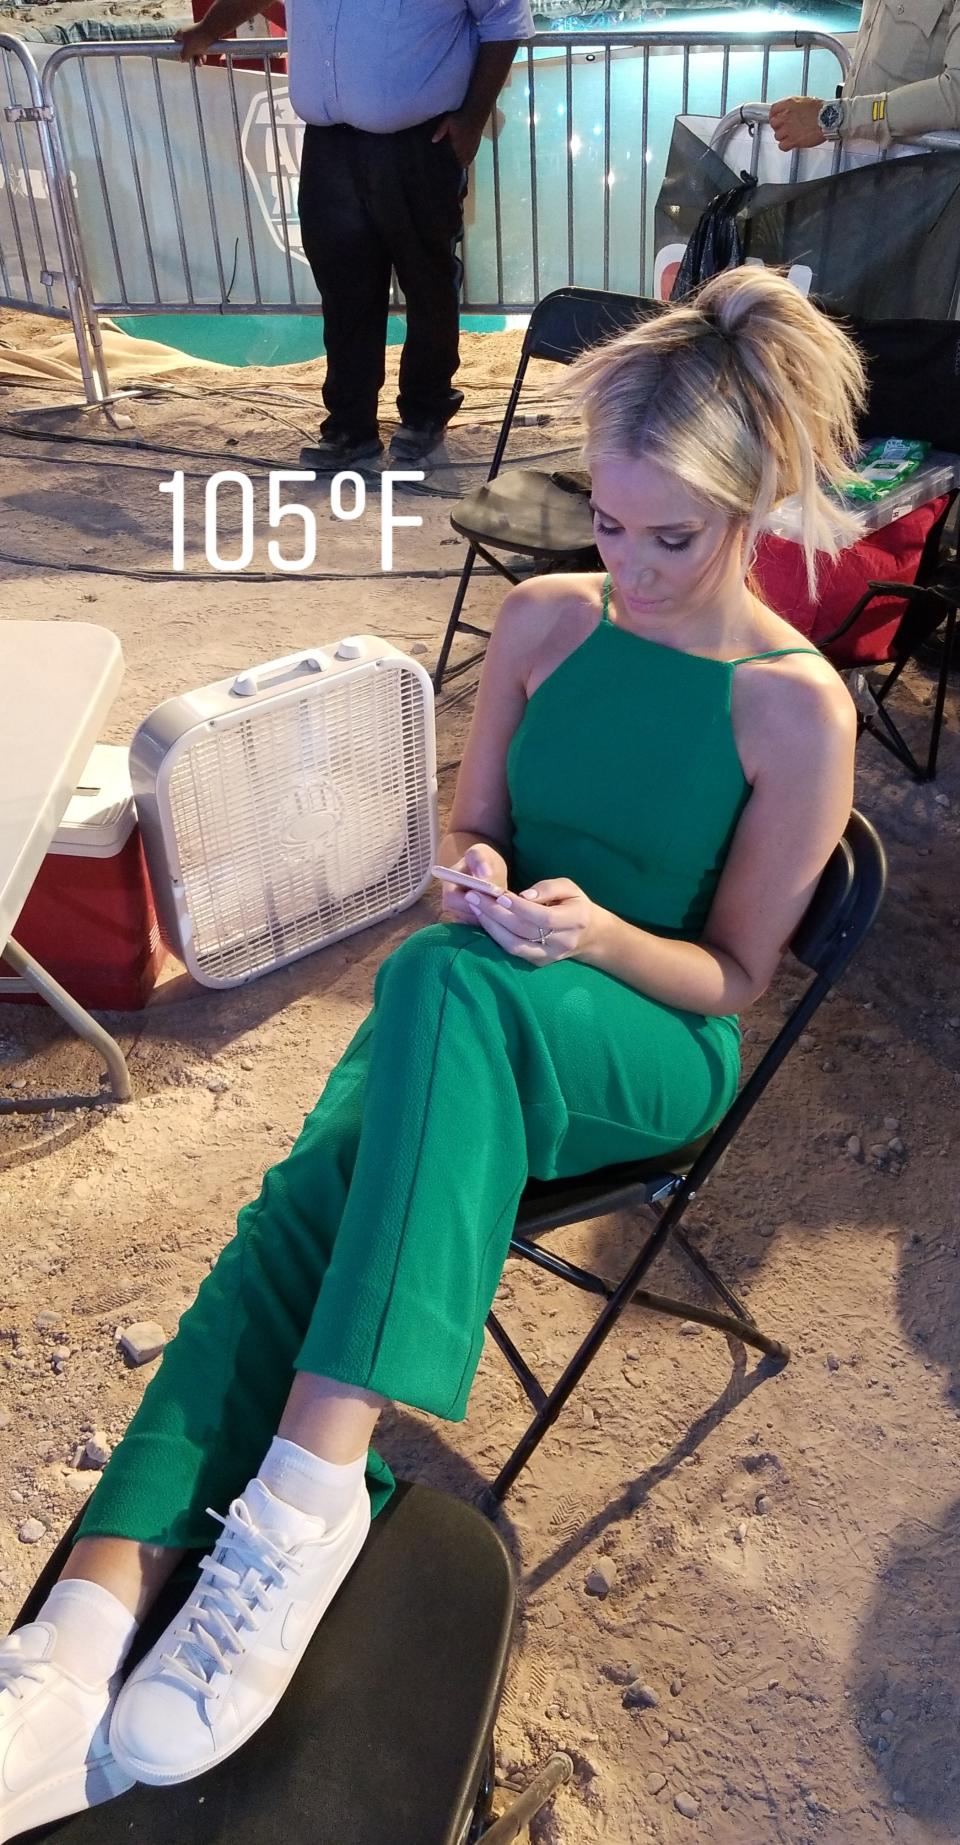 <p>Just doing a little email and temperature check during a break – Yes it was still 105 degrees at midnight. — @kristineleahy </p>